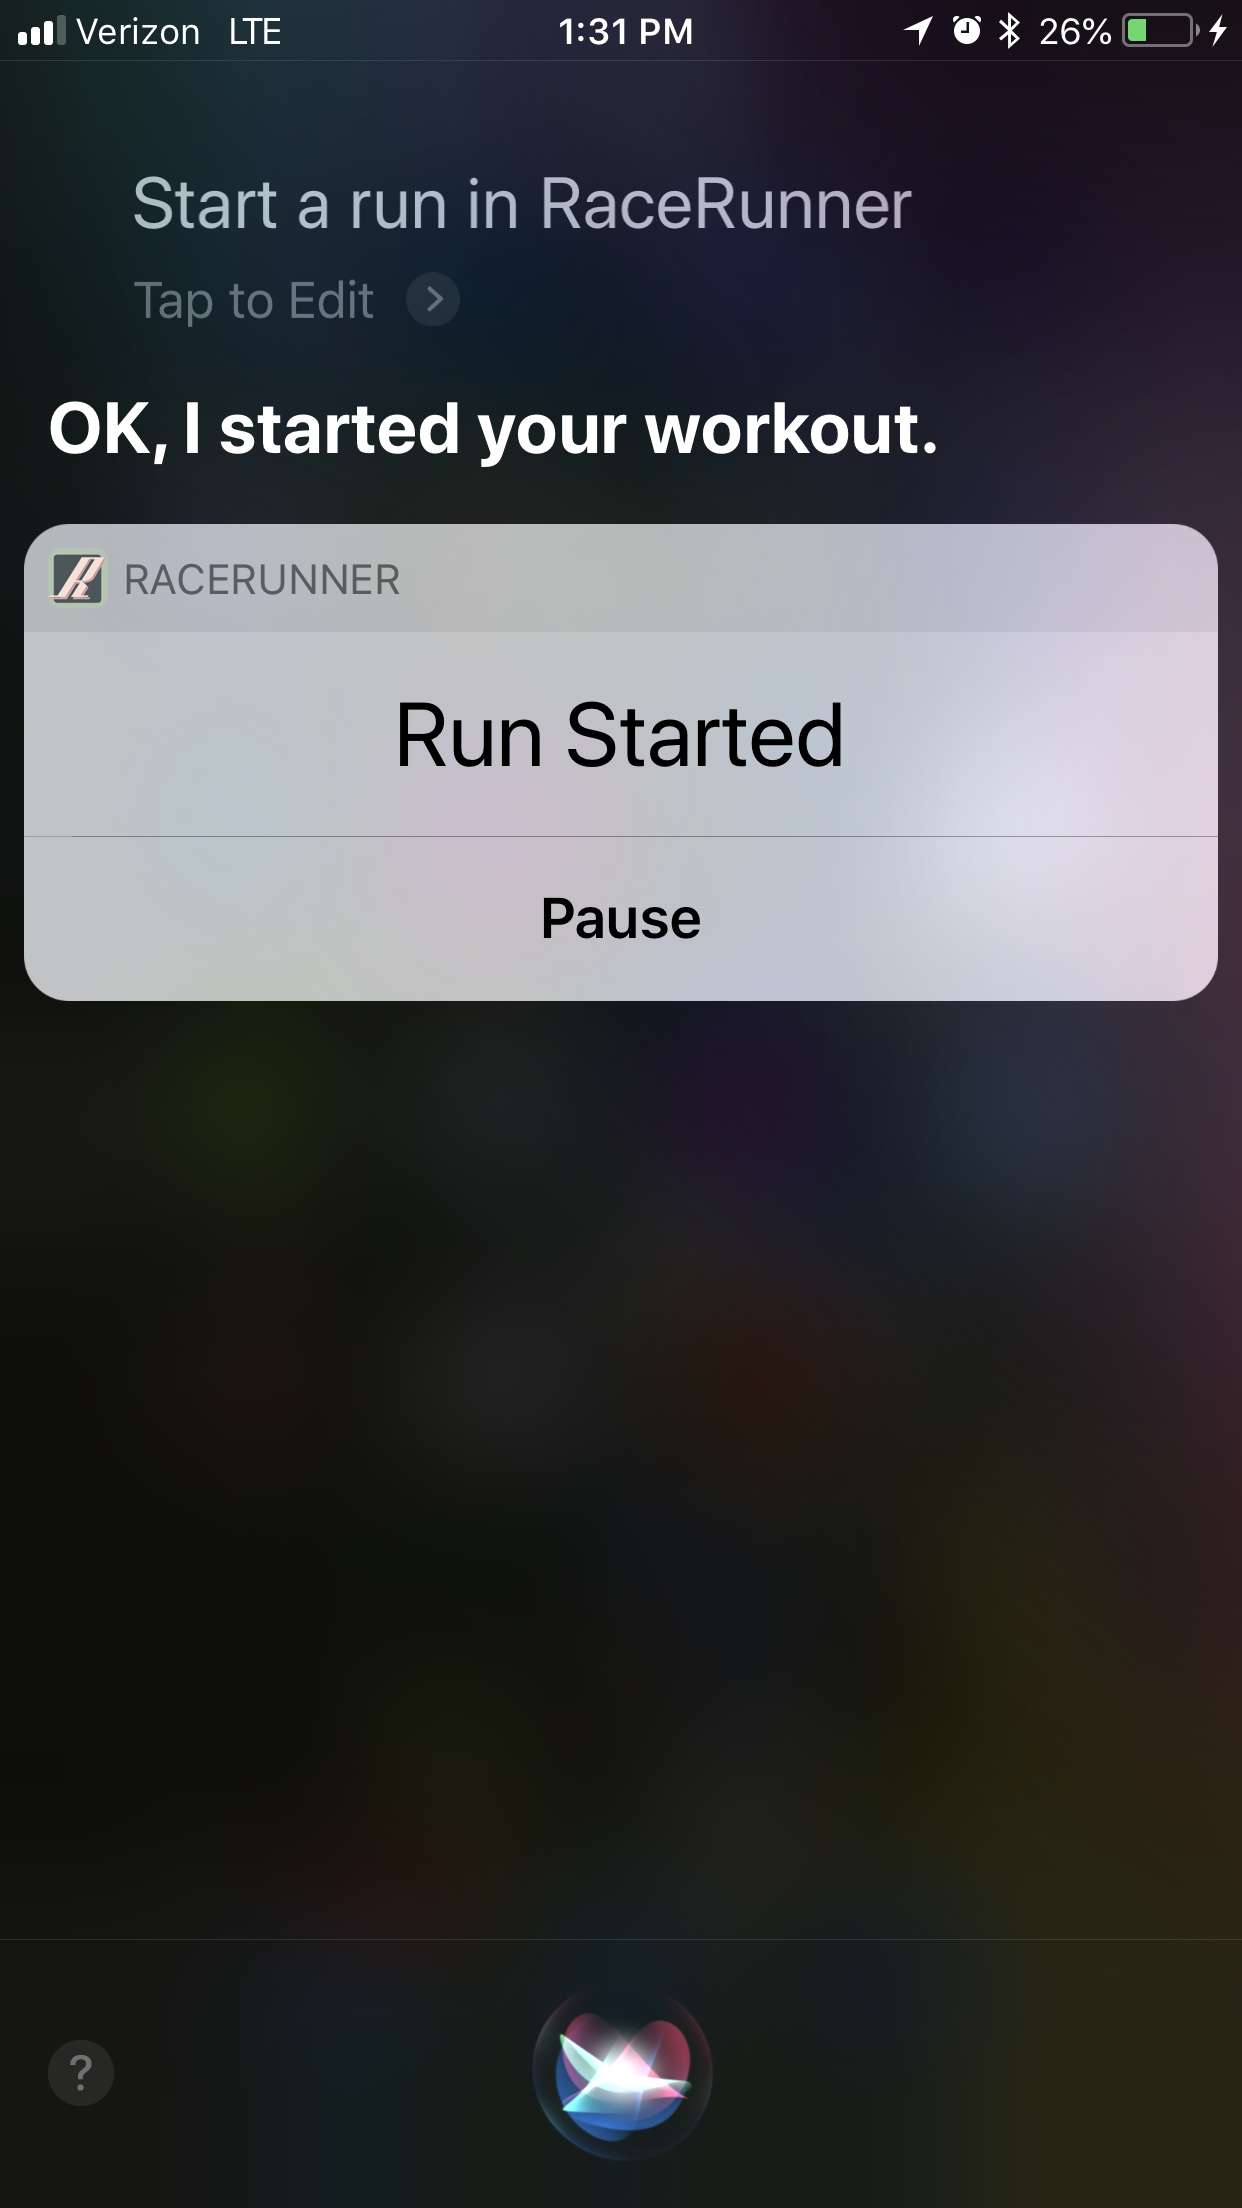 RaceRunner Workout Started with Siri